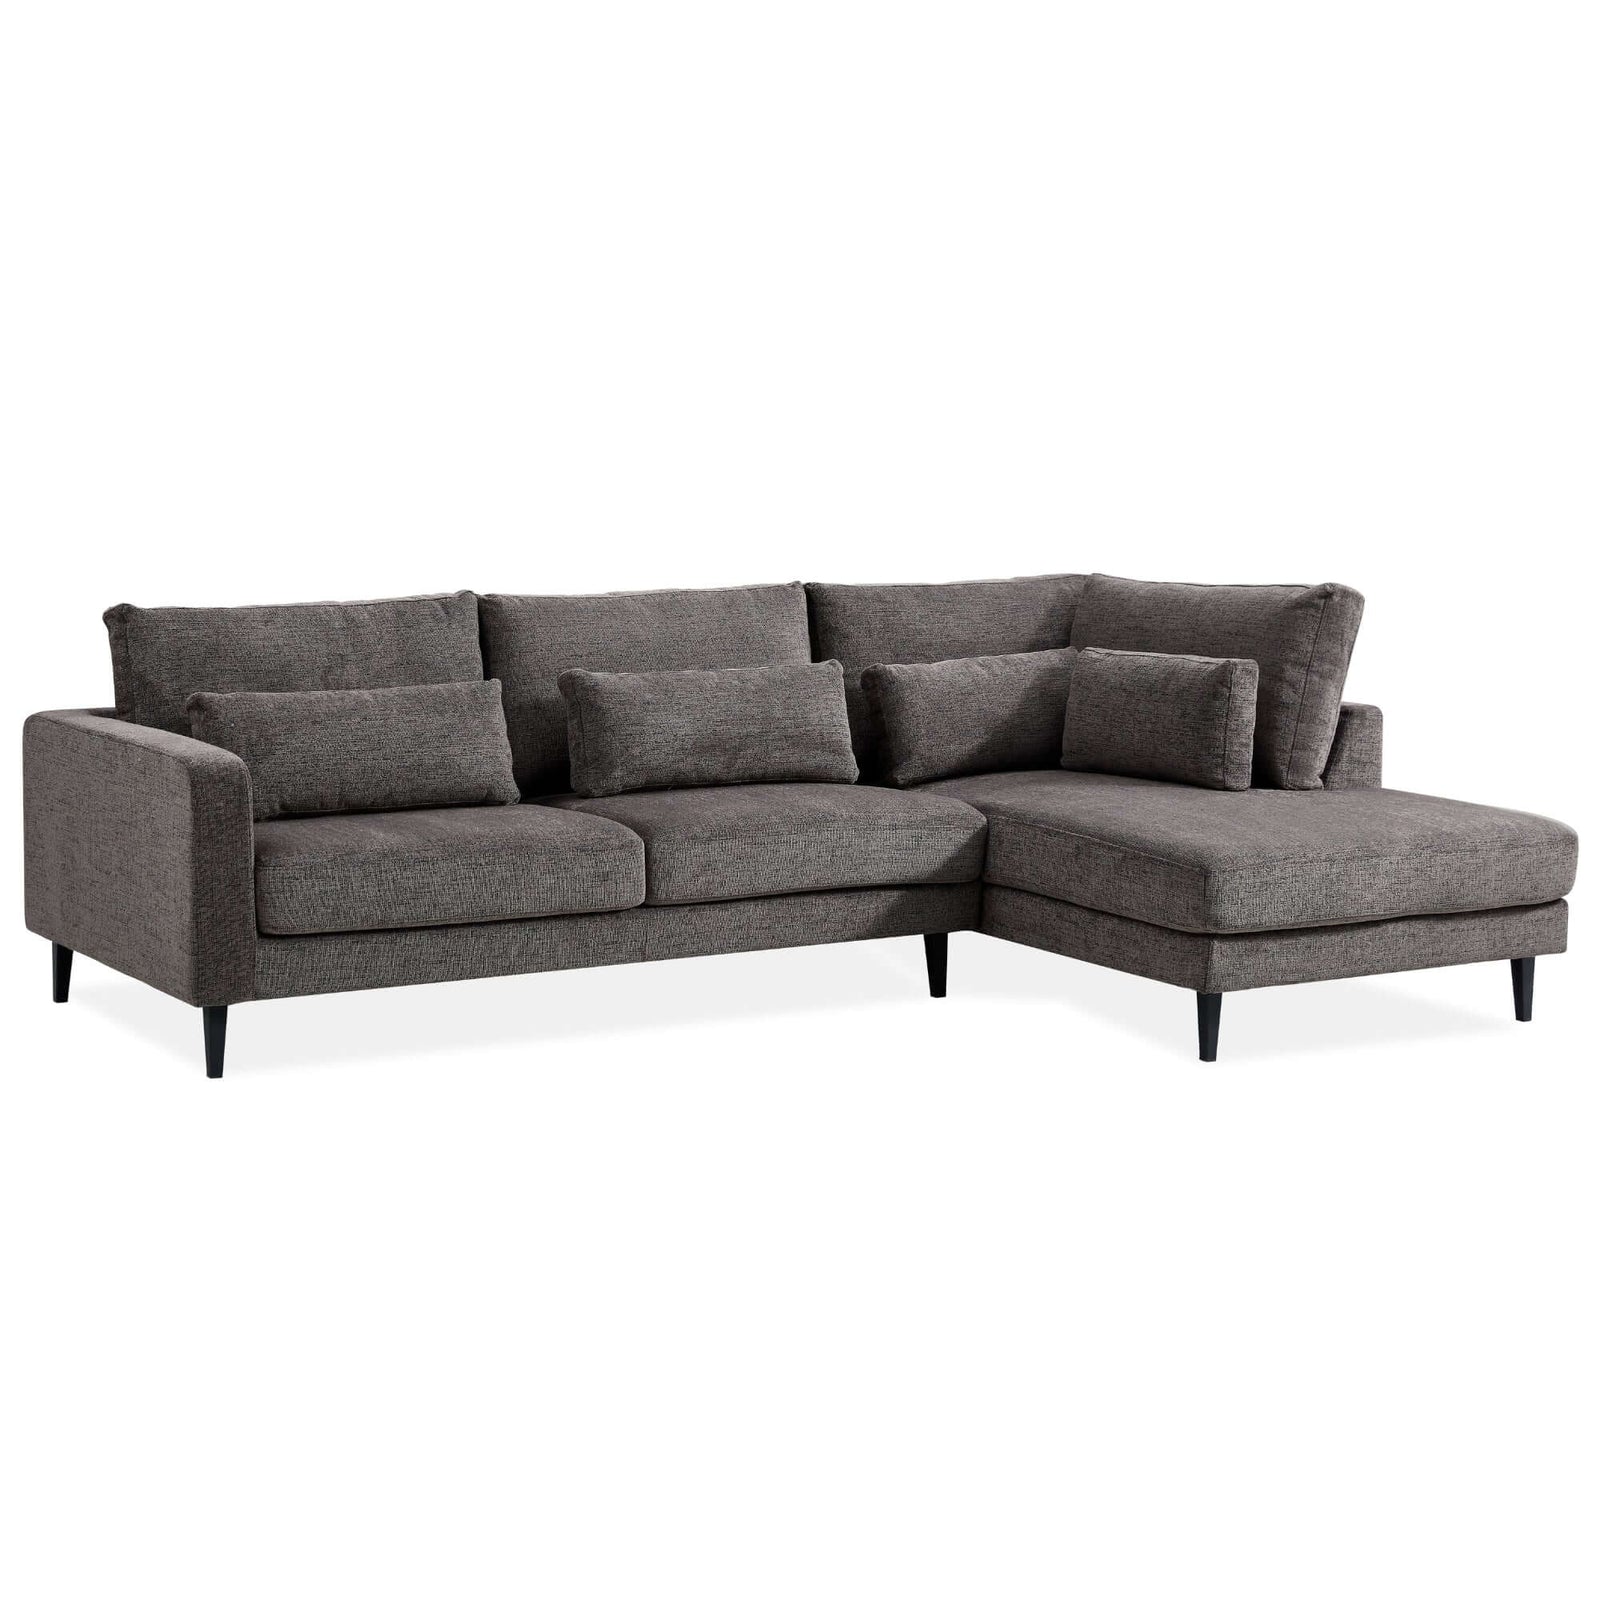 Kaylee 2 Seater Sofa Fabric Uplholstered Right Chaise Lounge Couch - Mink-Upinteriors